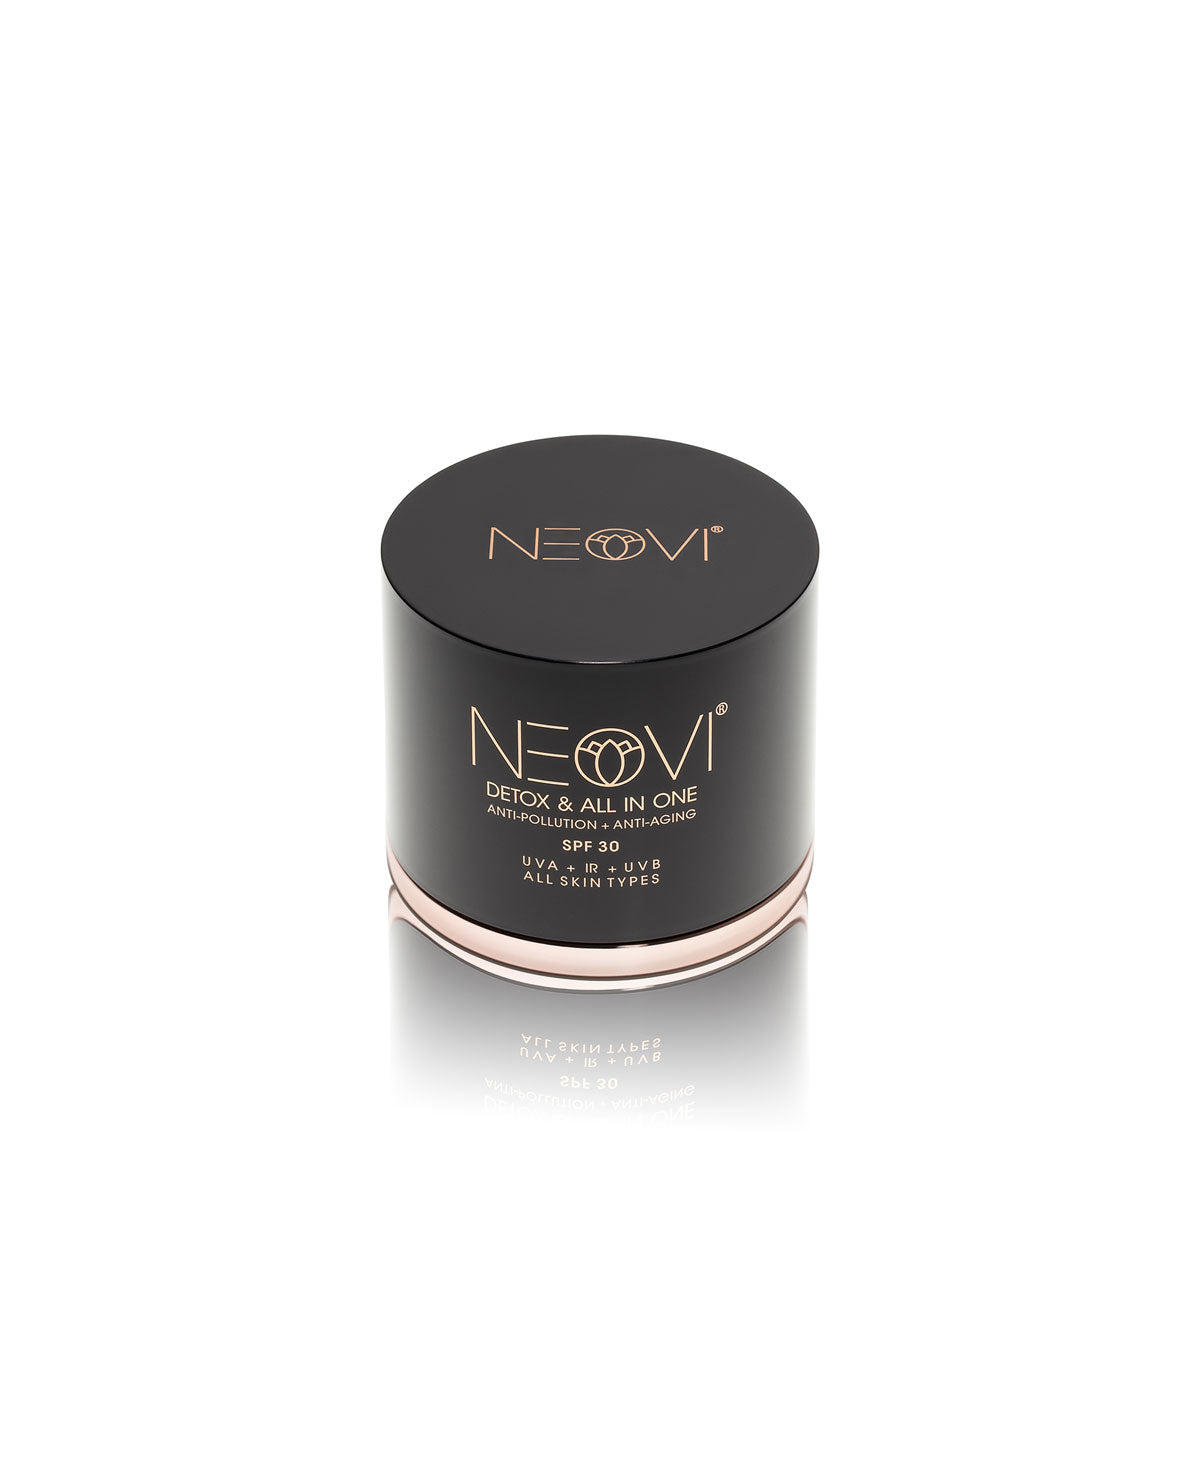 NEOVI DETOX & ALL IN ONE ANTI-POLLUTION and ANTI-AGING FACE CREAM